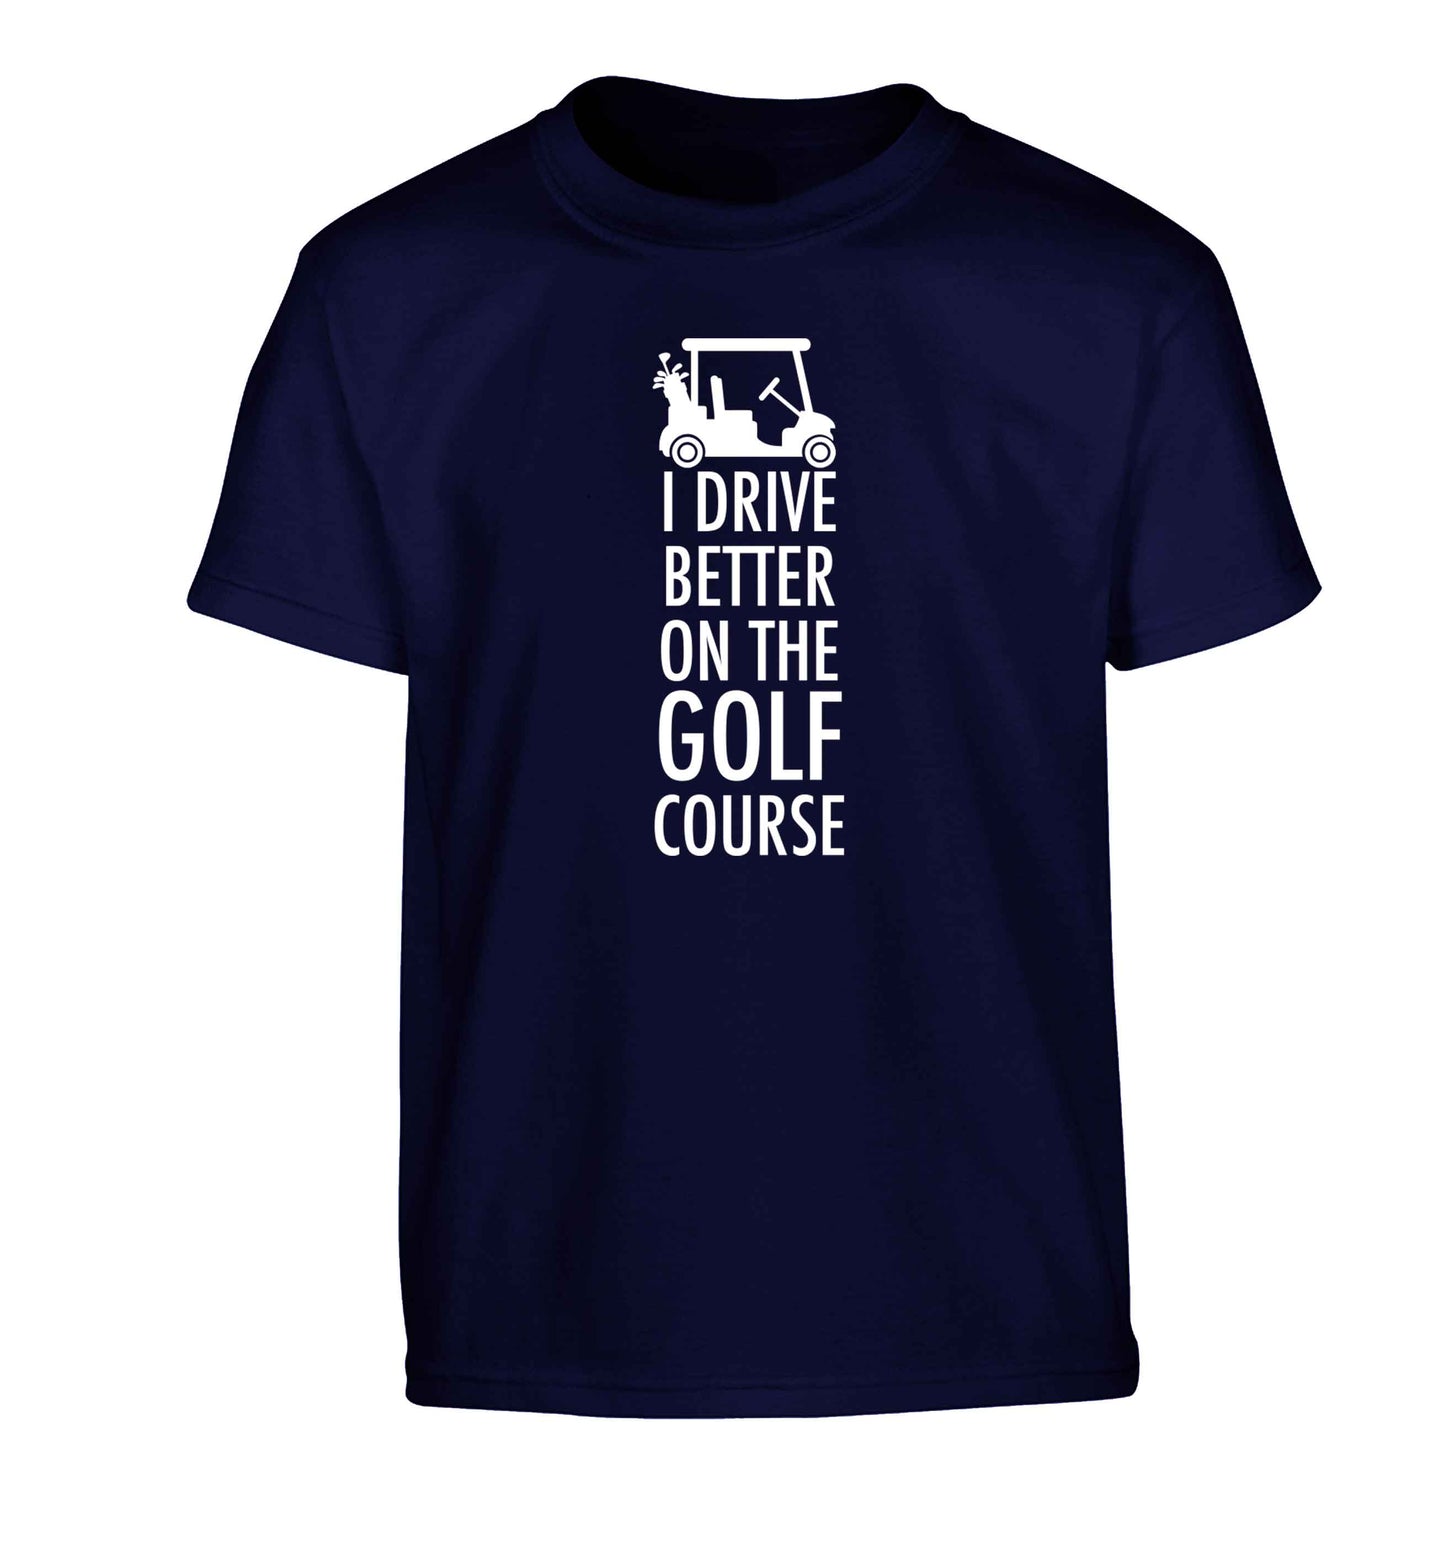 I drive better on the golf course Children's navy Tshirt 12-13 Years